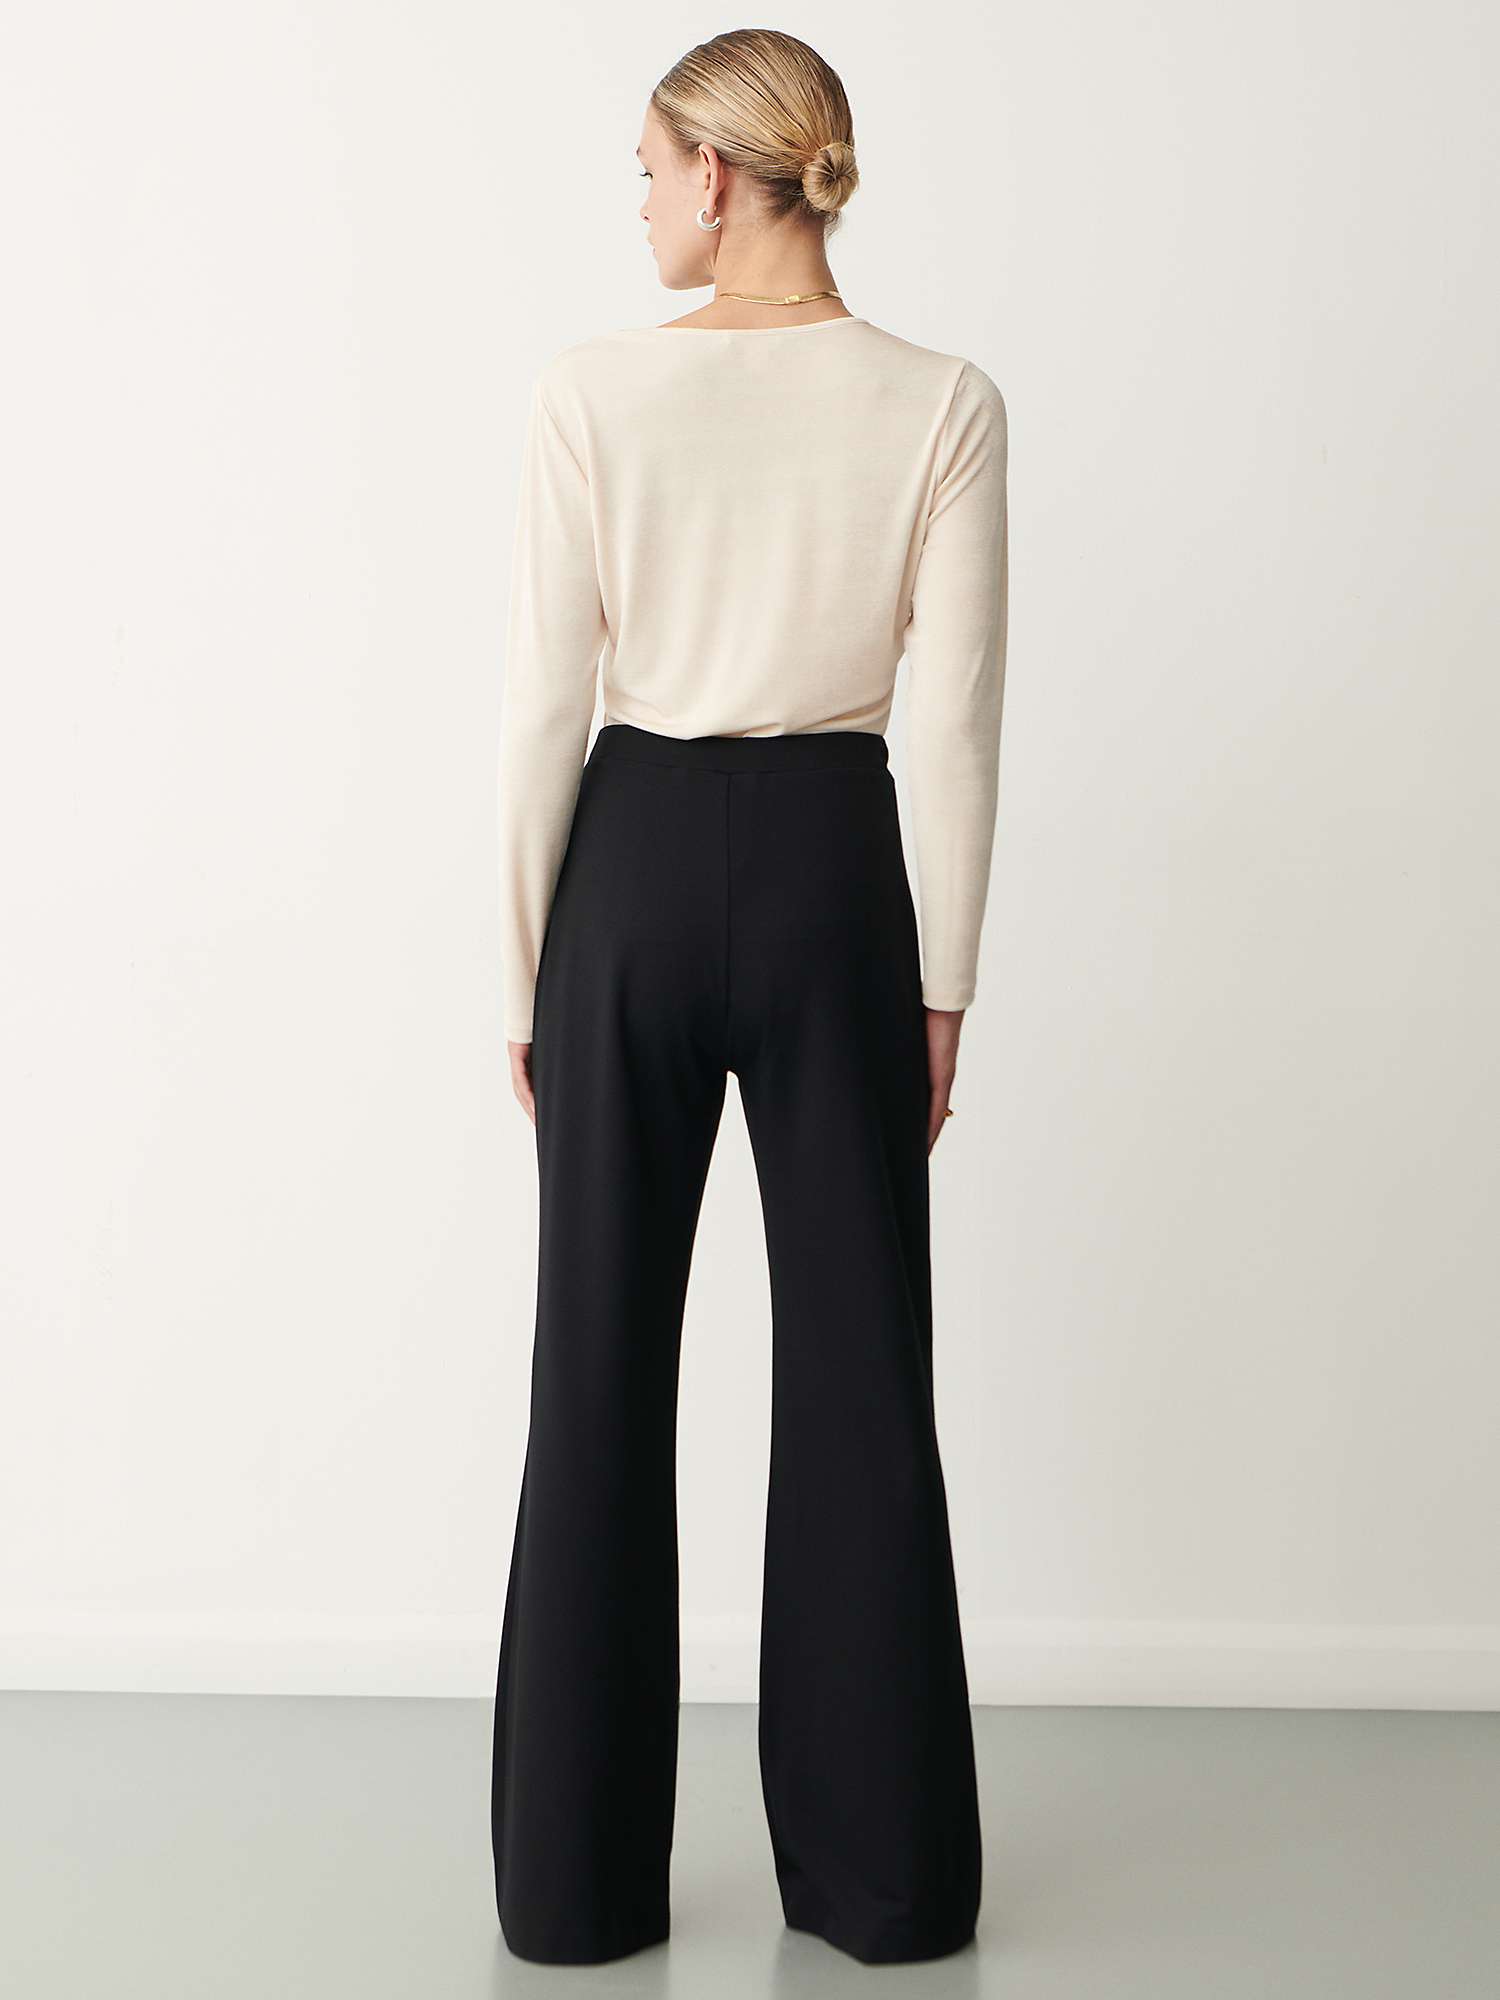 Finery Reyna Flared Trousers, Black at John Lewis & Partners